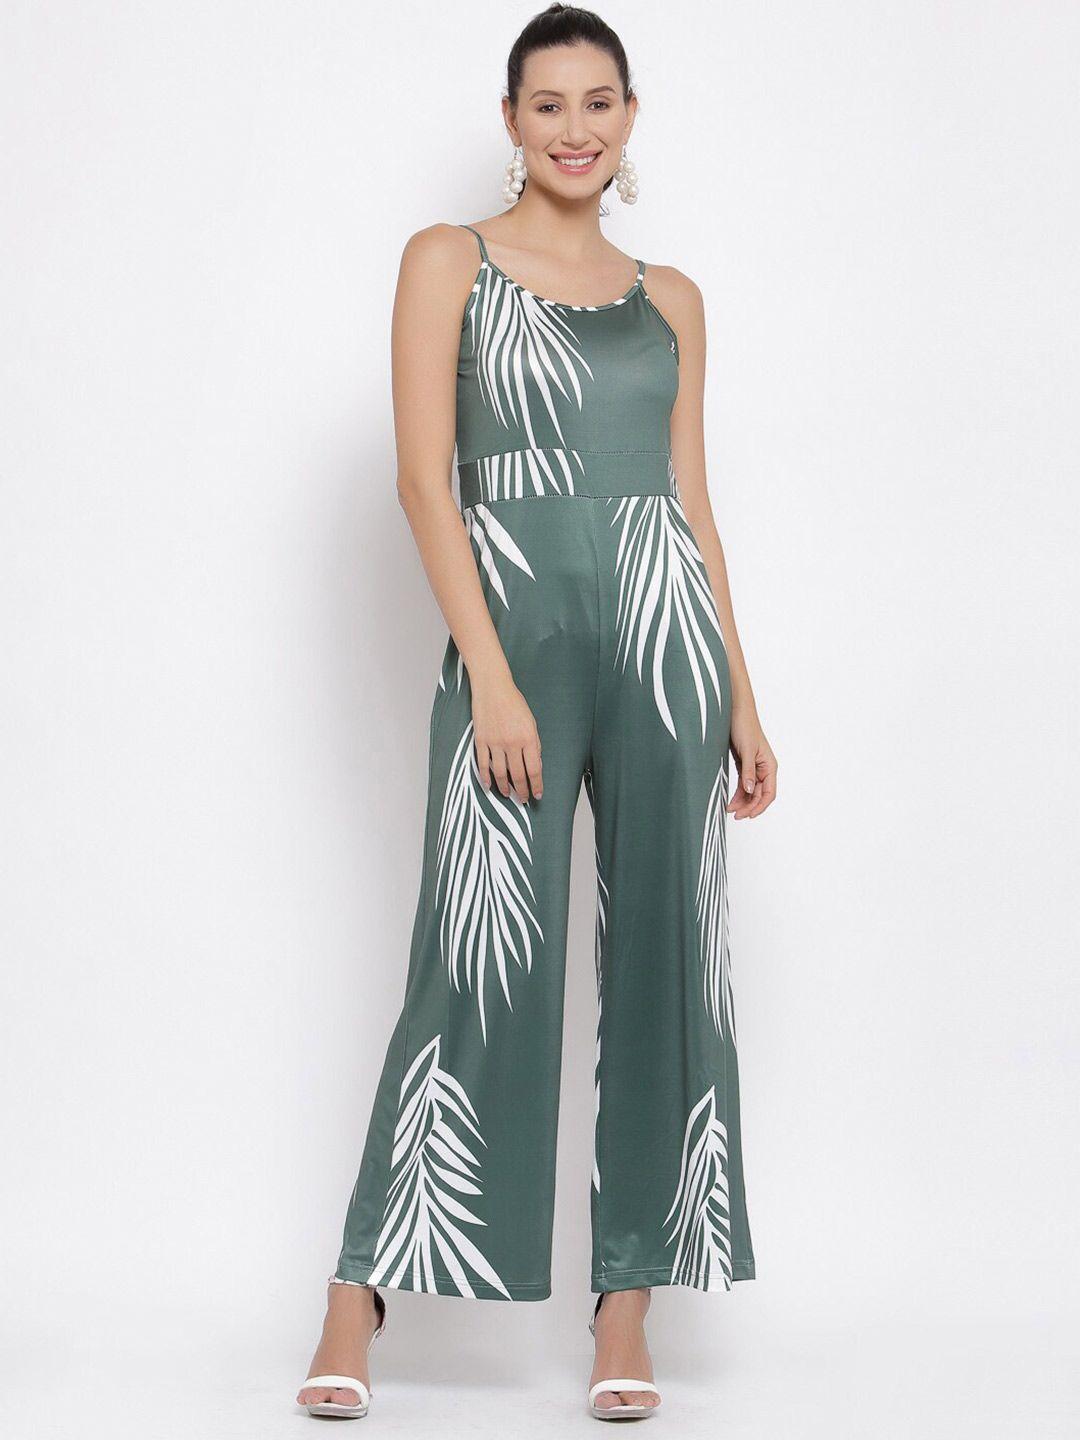 iki chic green & white printed culotte jumpsuit